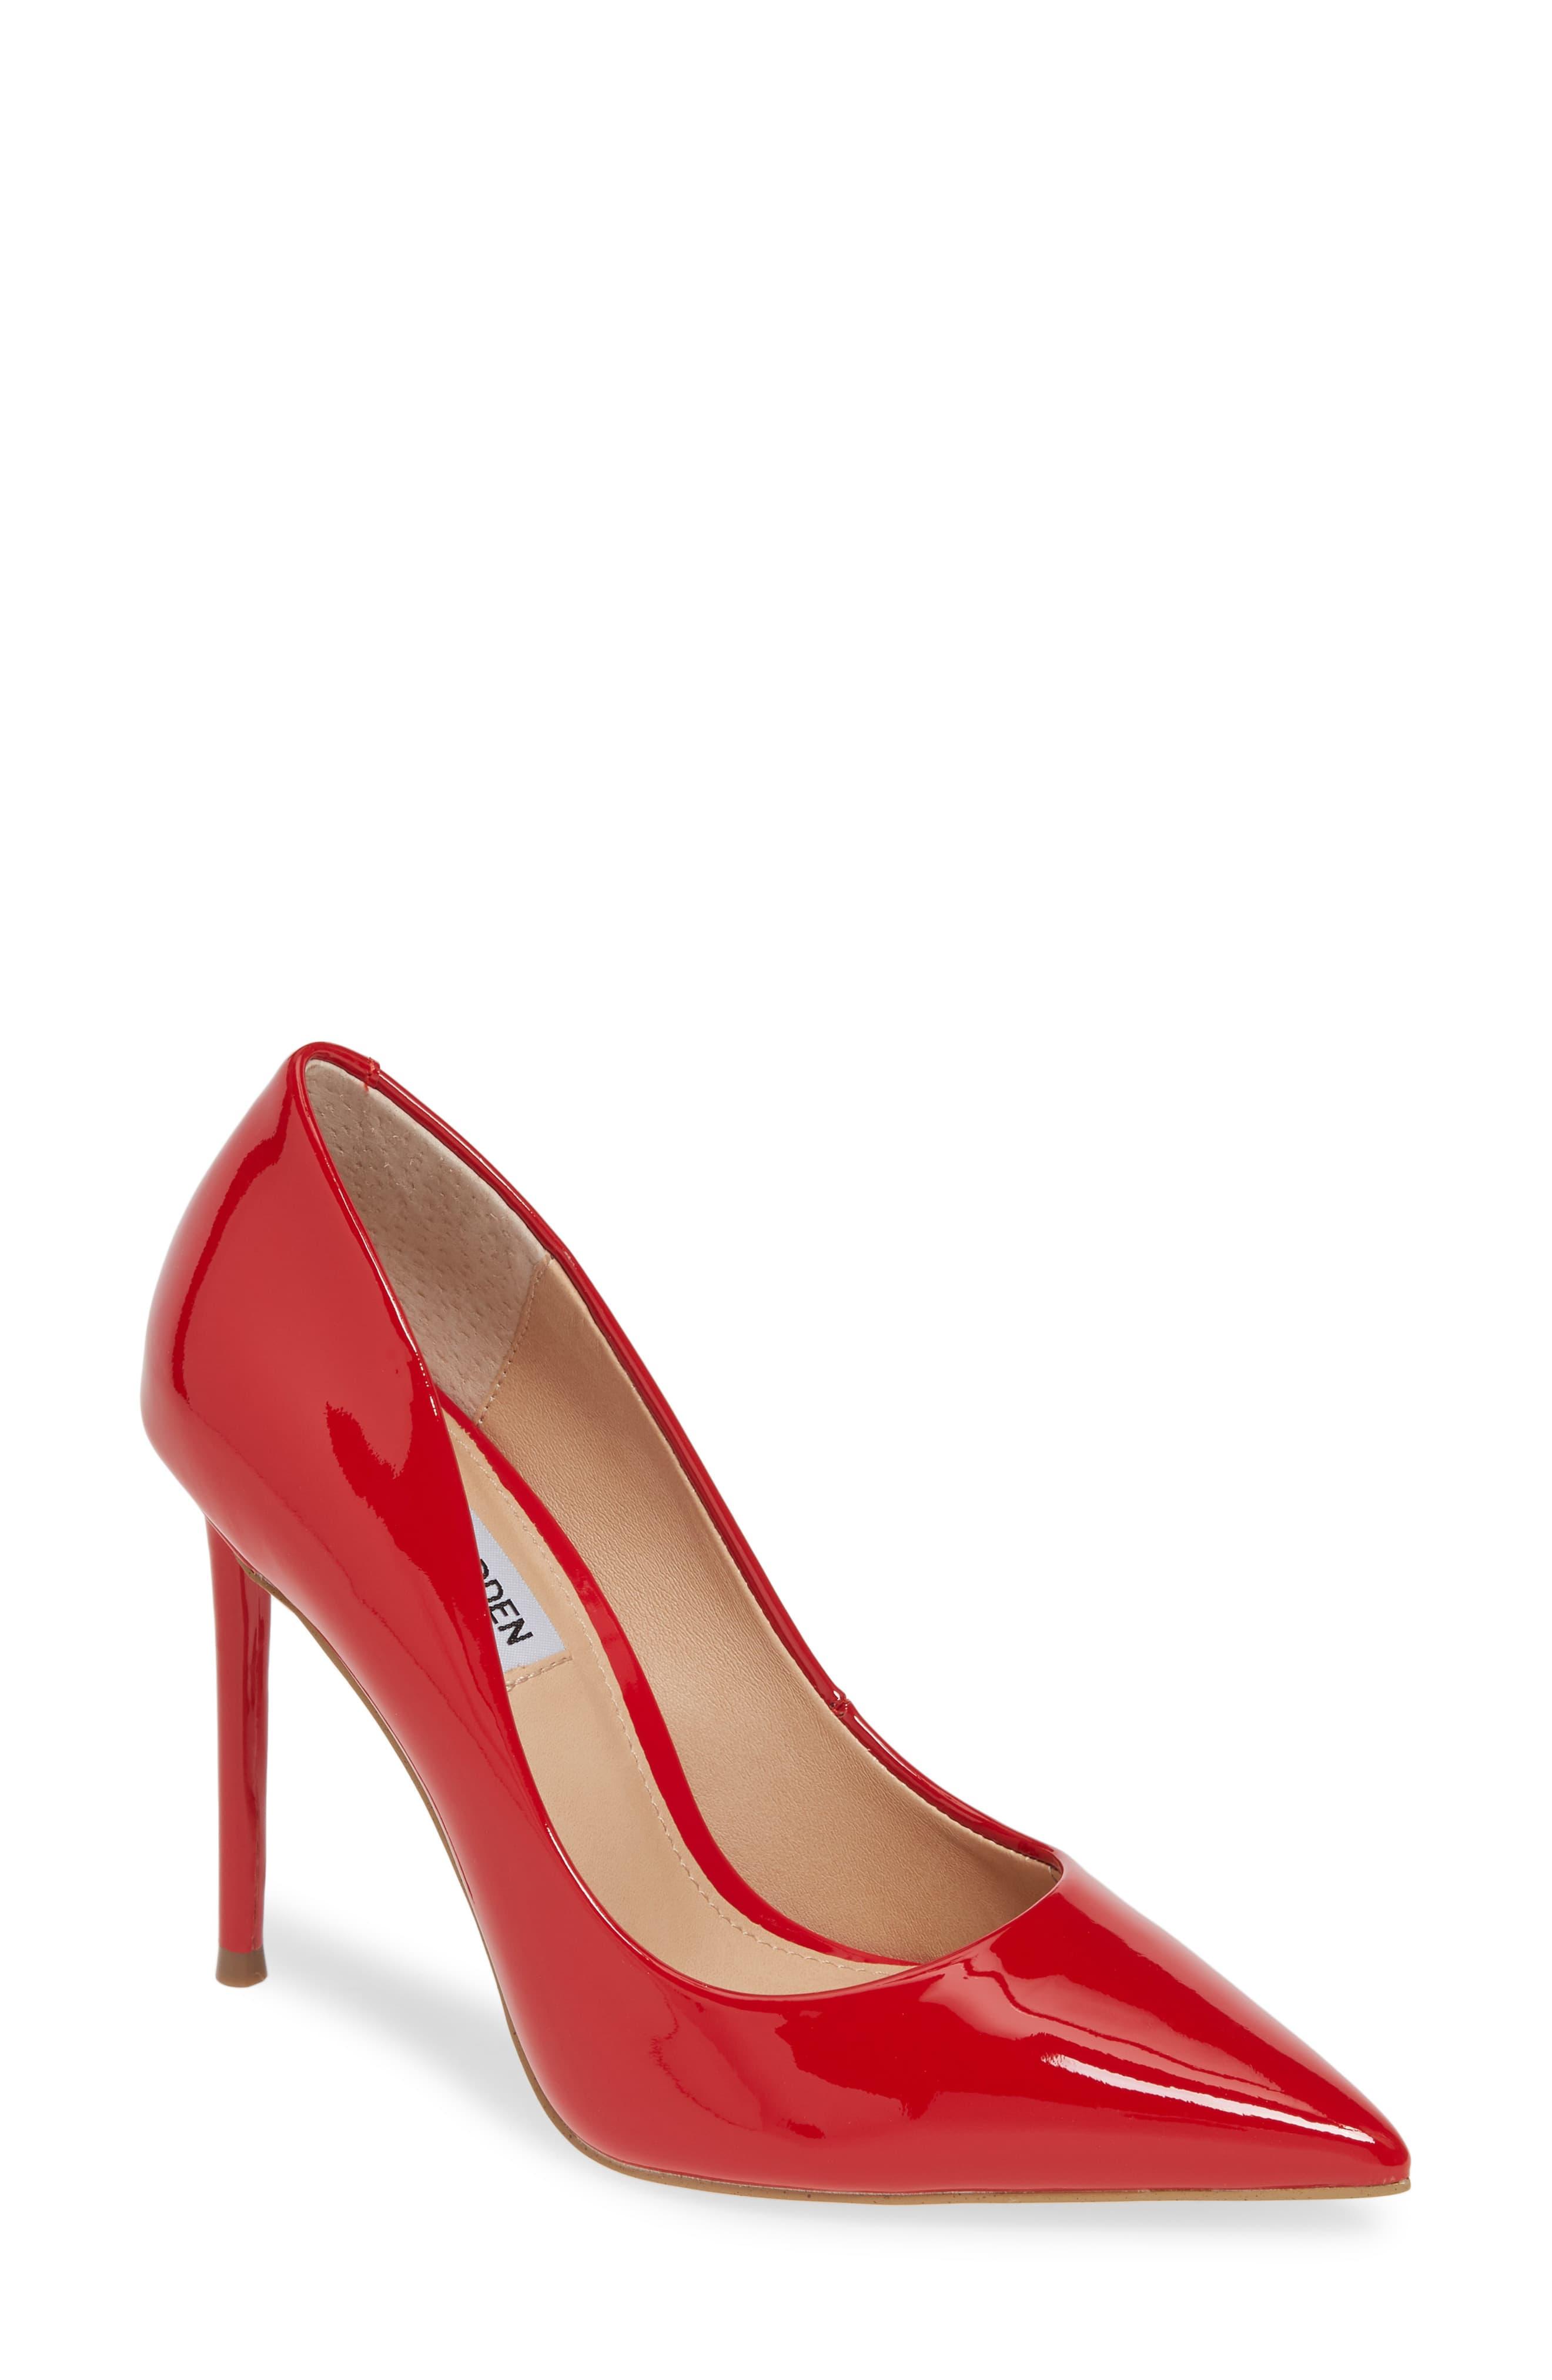 Steve Madden Vala Pointy Toe Pump in Red Patent (Red) - Lyst